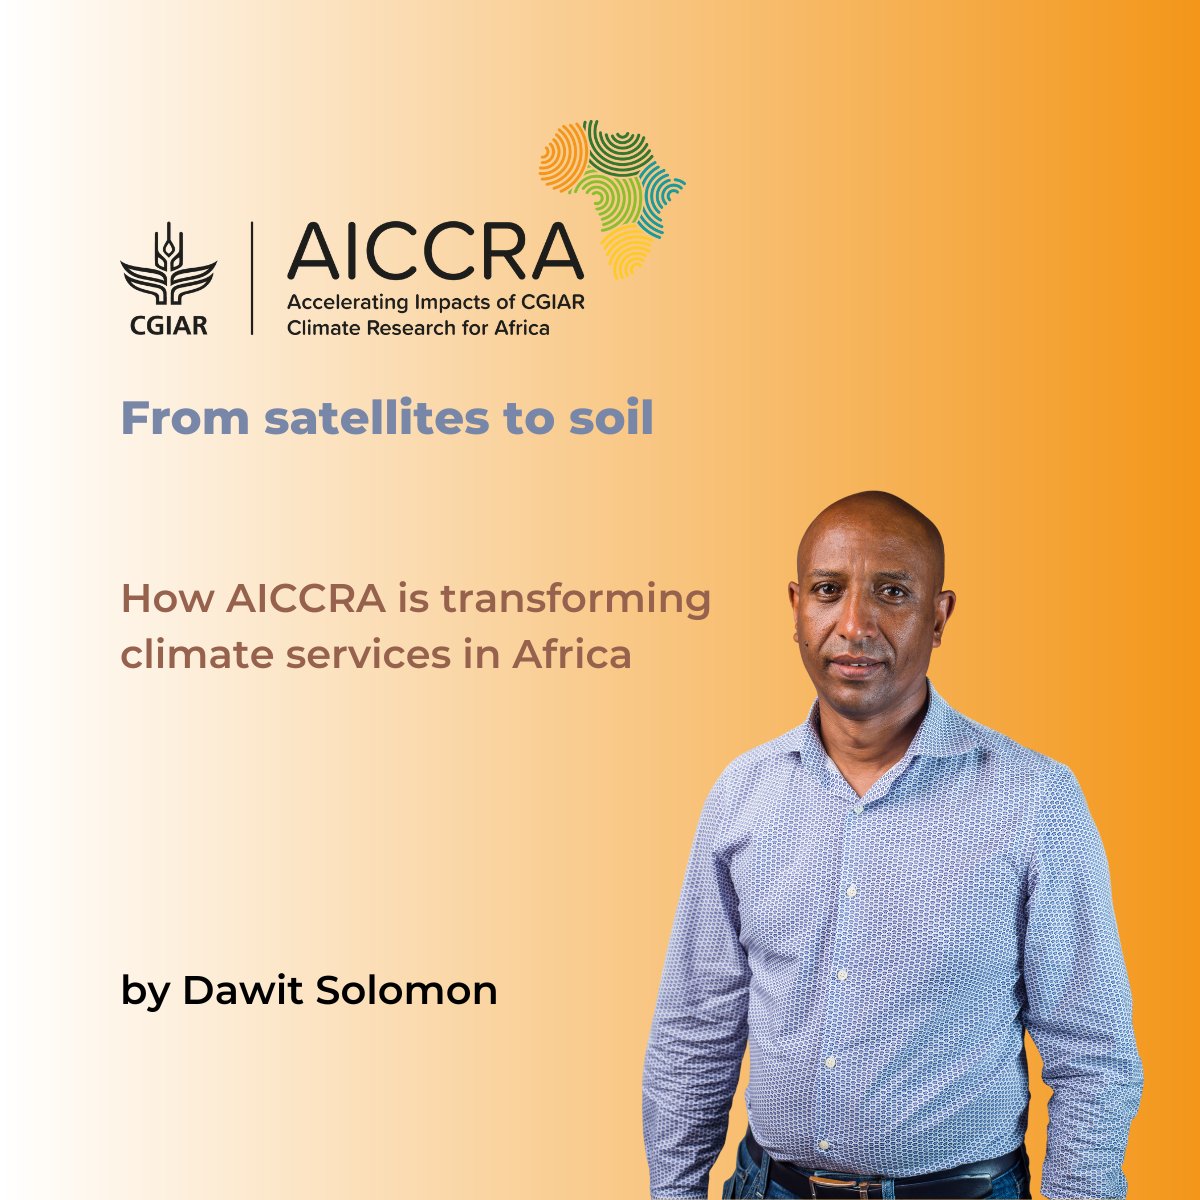 With our partners, AICCRA is mainstreaming science-based climate information into agricultural planning, policy and decision making - supporting resilient end-users across the continent.

🔗 Read more in our feature piece: bit.ly/AICCRA2022

#ClimateSmartAfrica